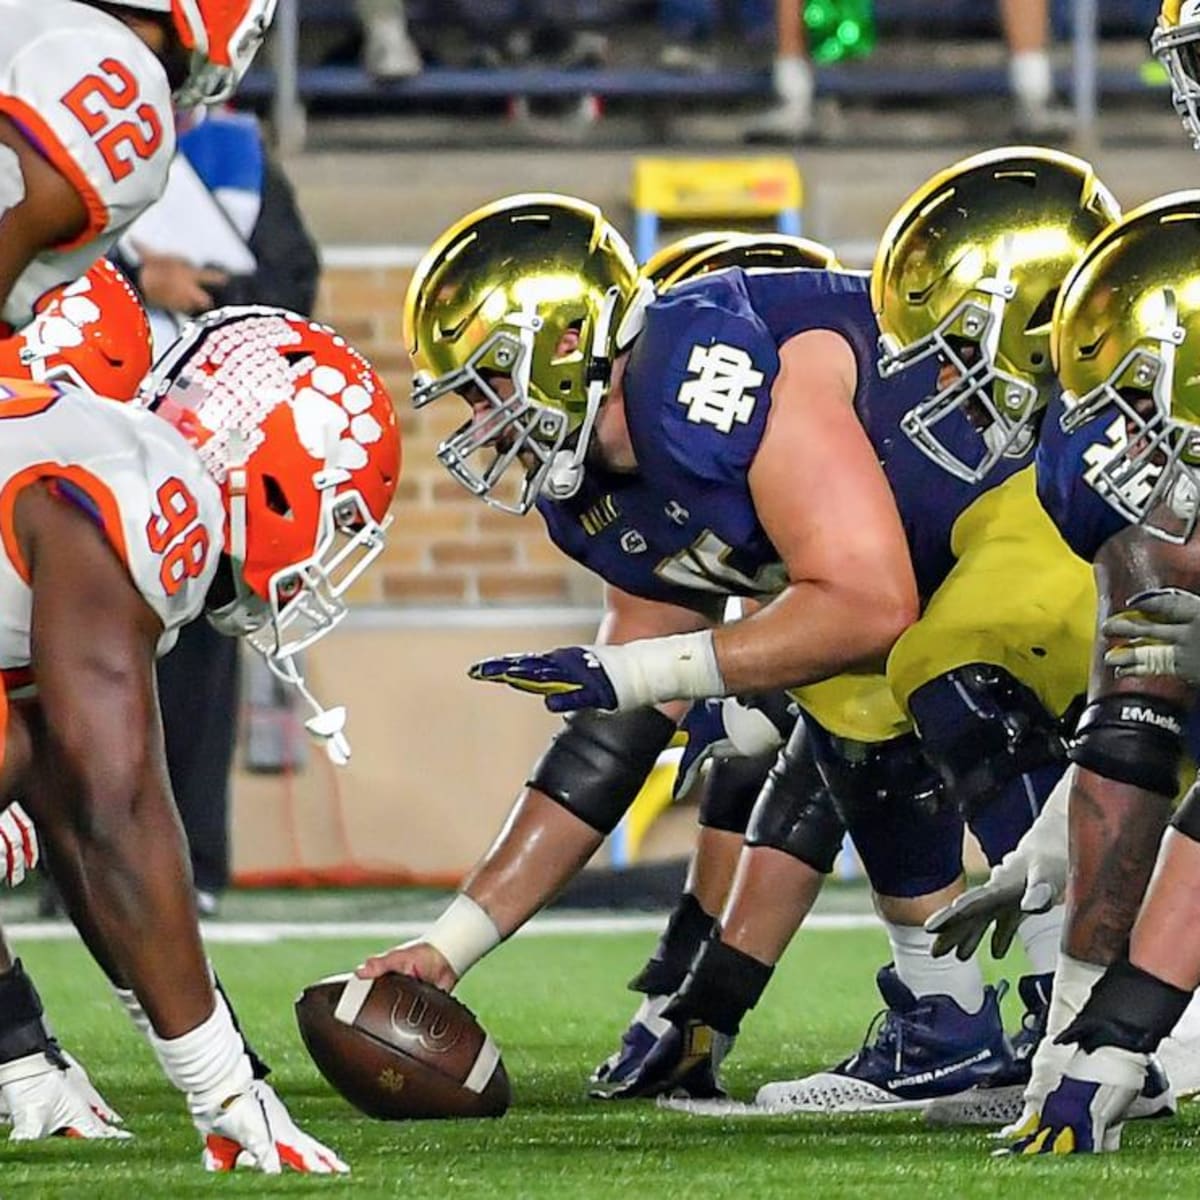 Notre Dame Is A Very Special Place For Star Tight End Brock